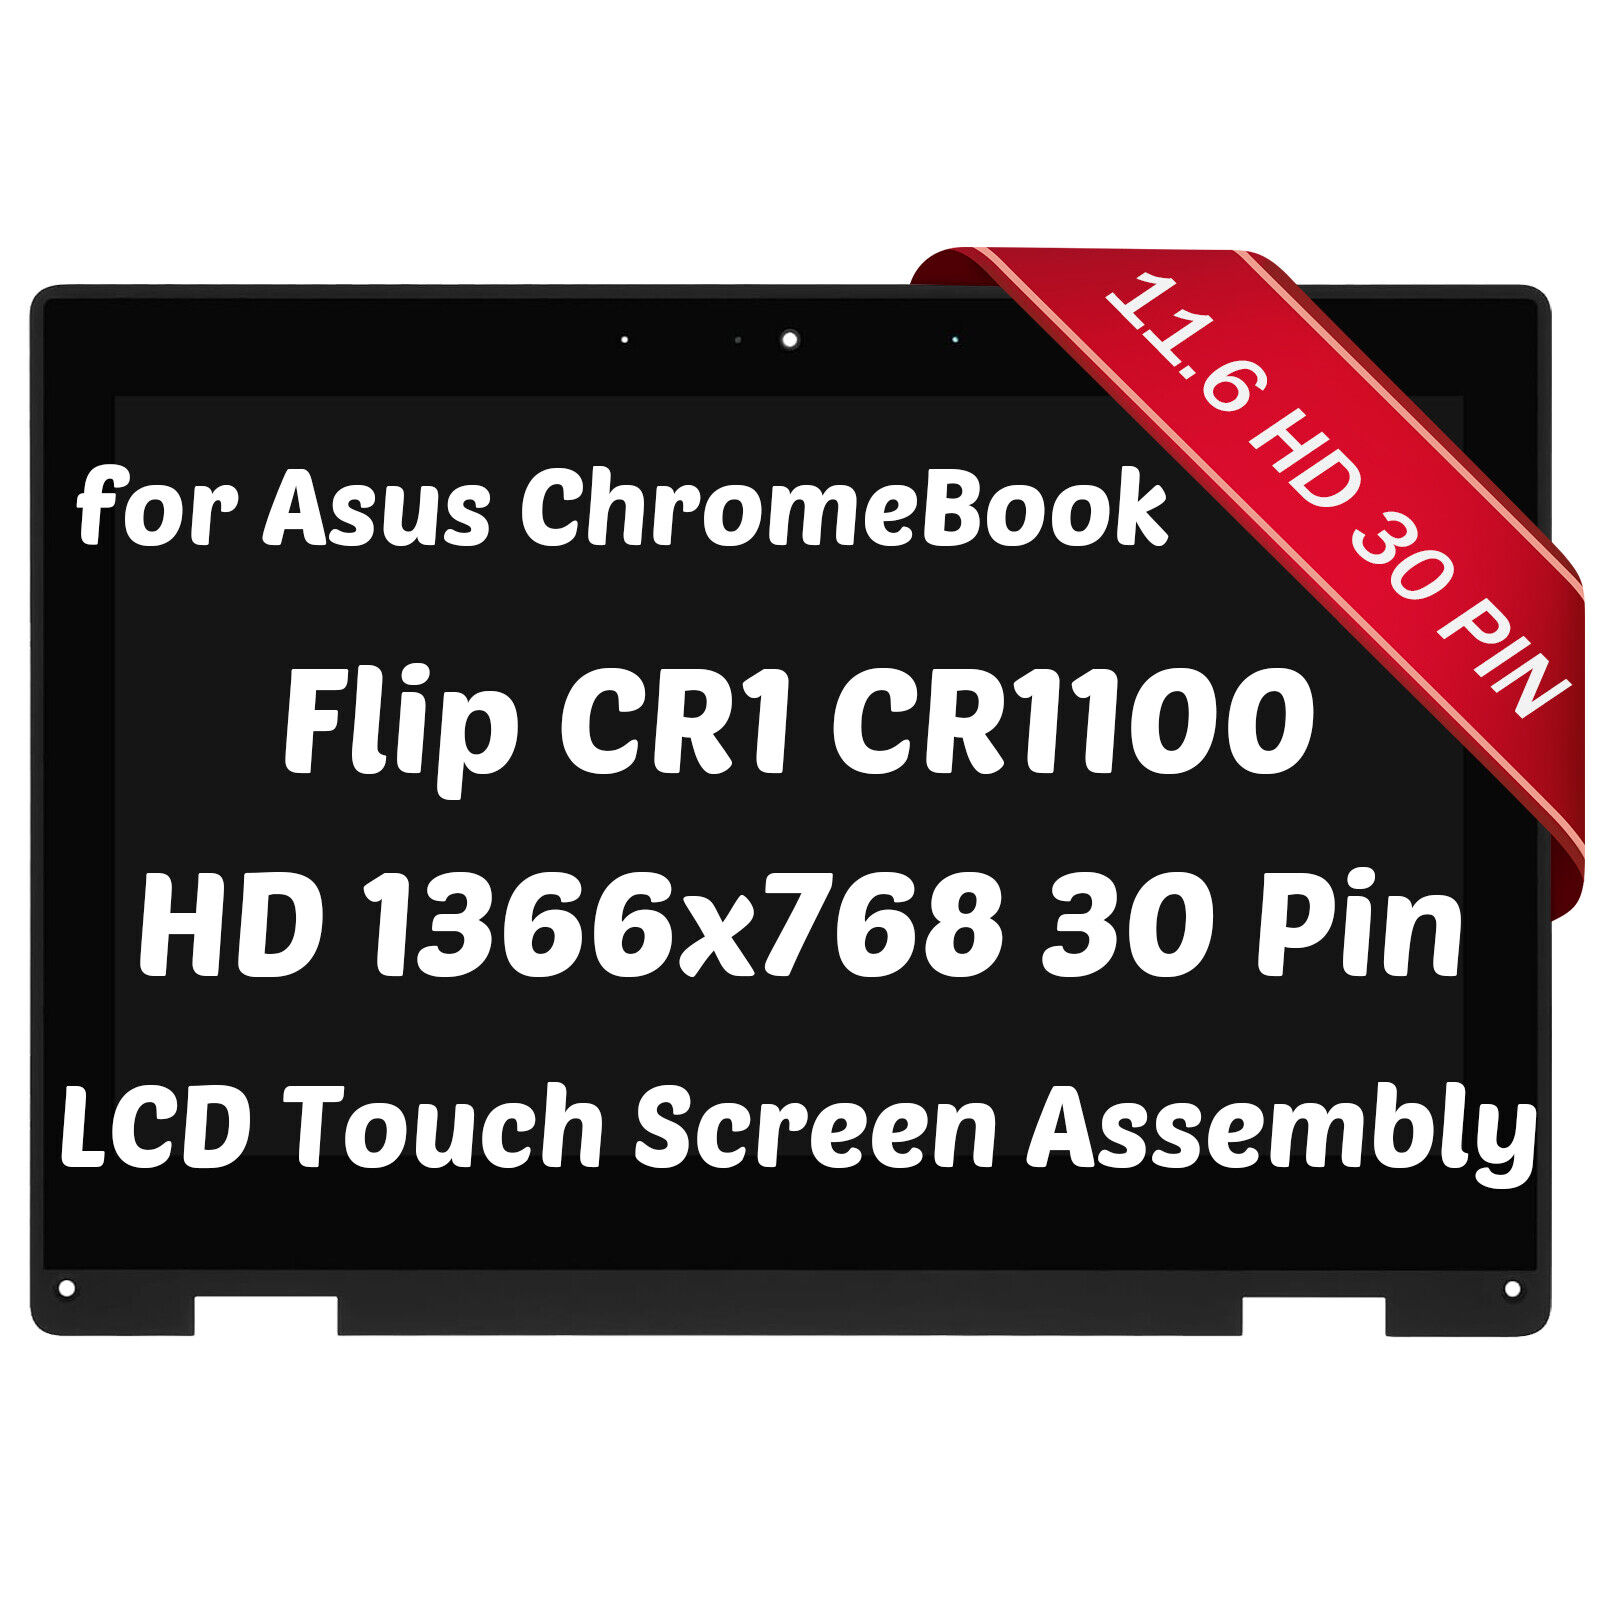 for ASUS Chromebook Flip CR1 CR1100FKA-YZ142T IPS LED LCD Touch Screen Assembly